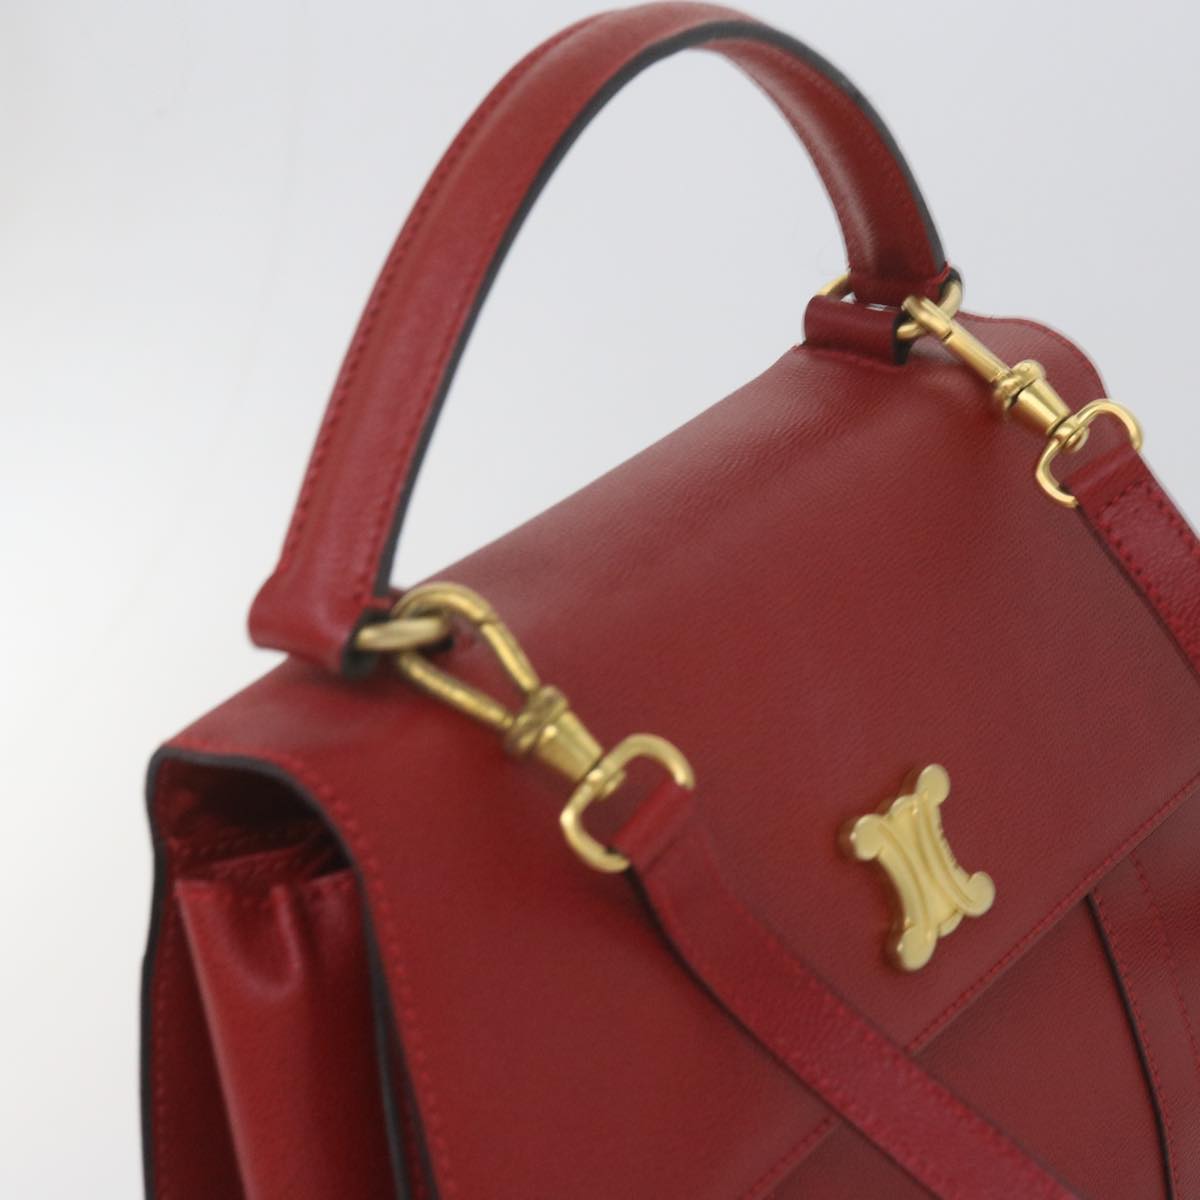 CELINE Hand Bag Leather 2way Red Auth am5388